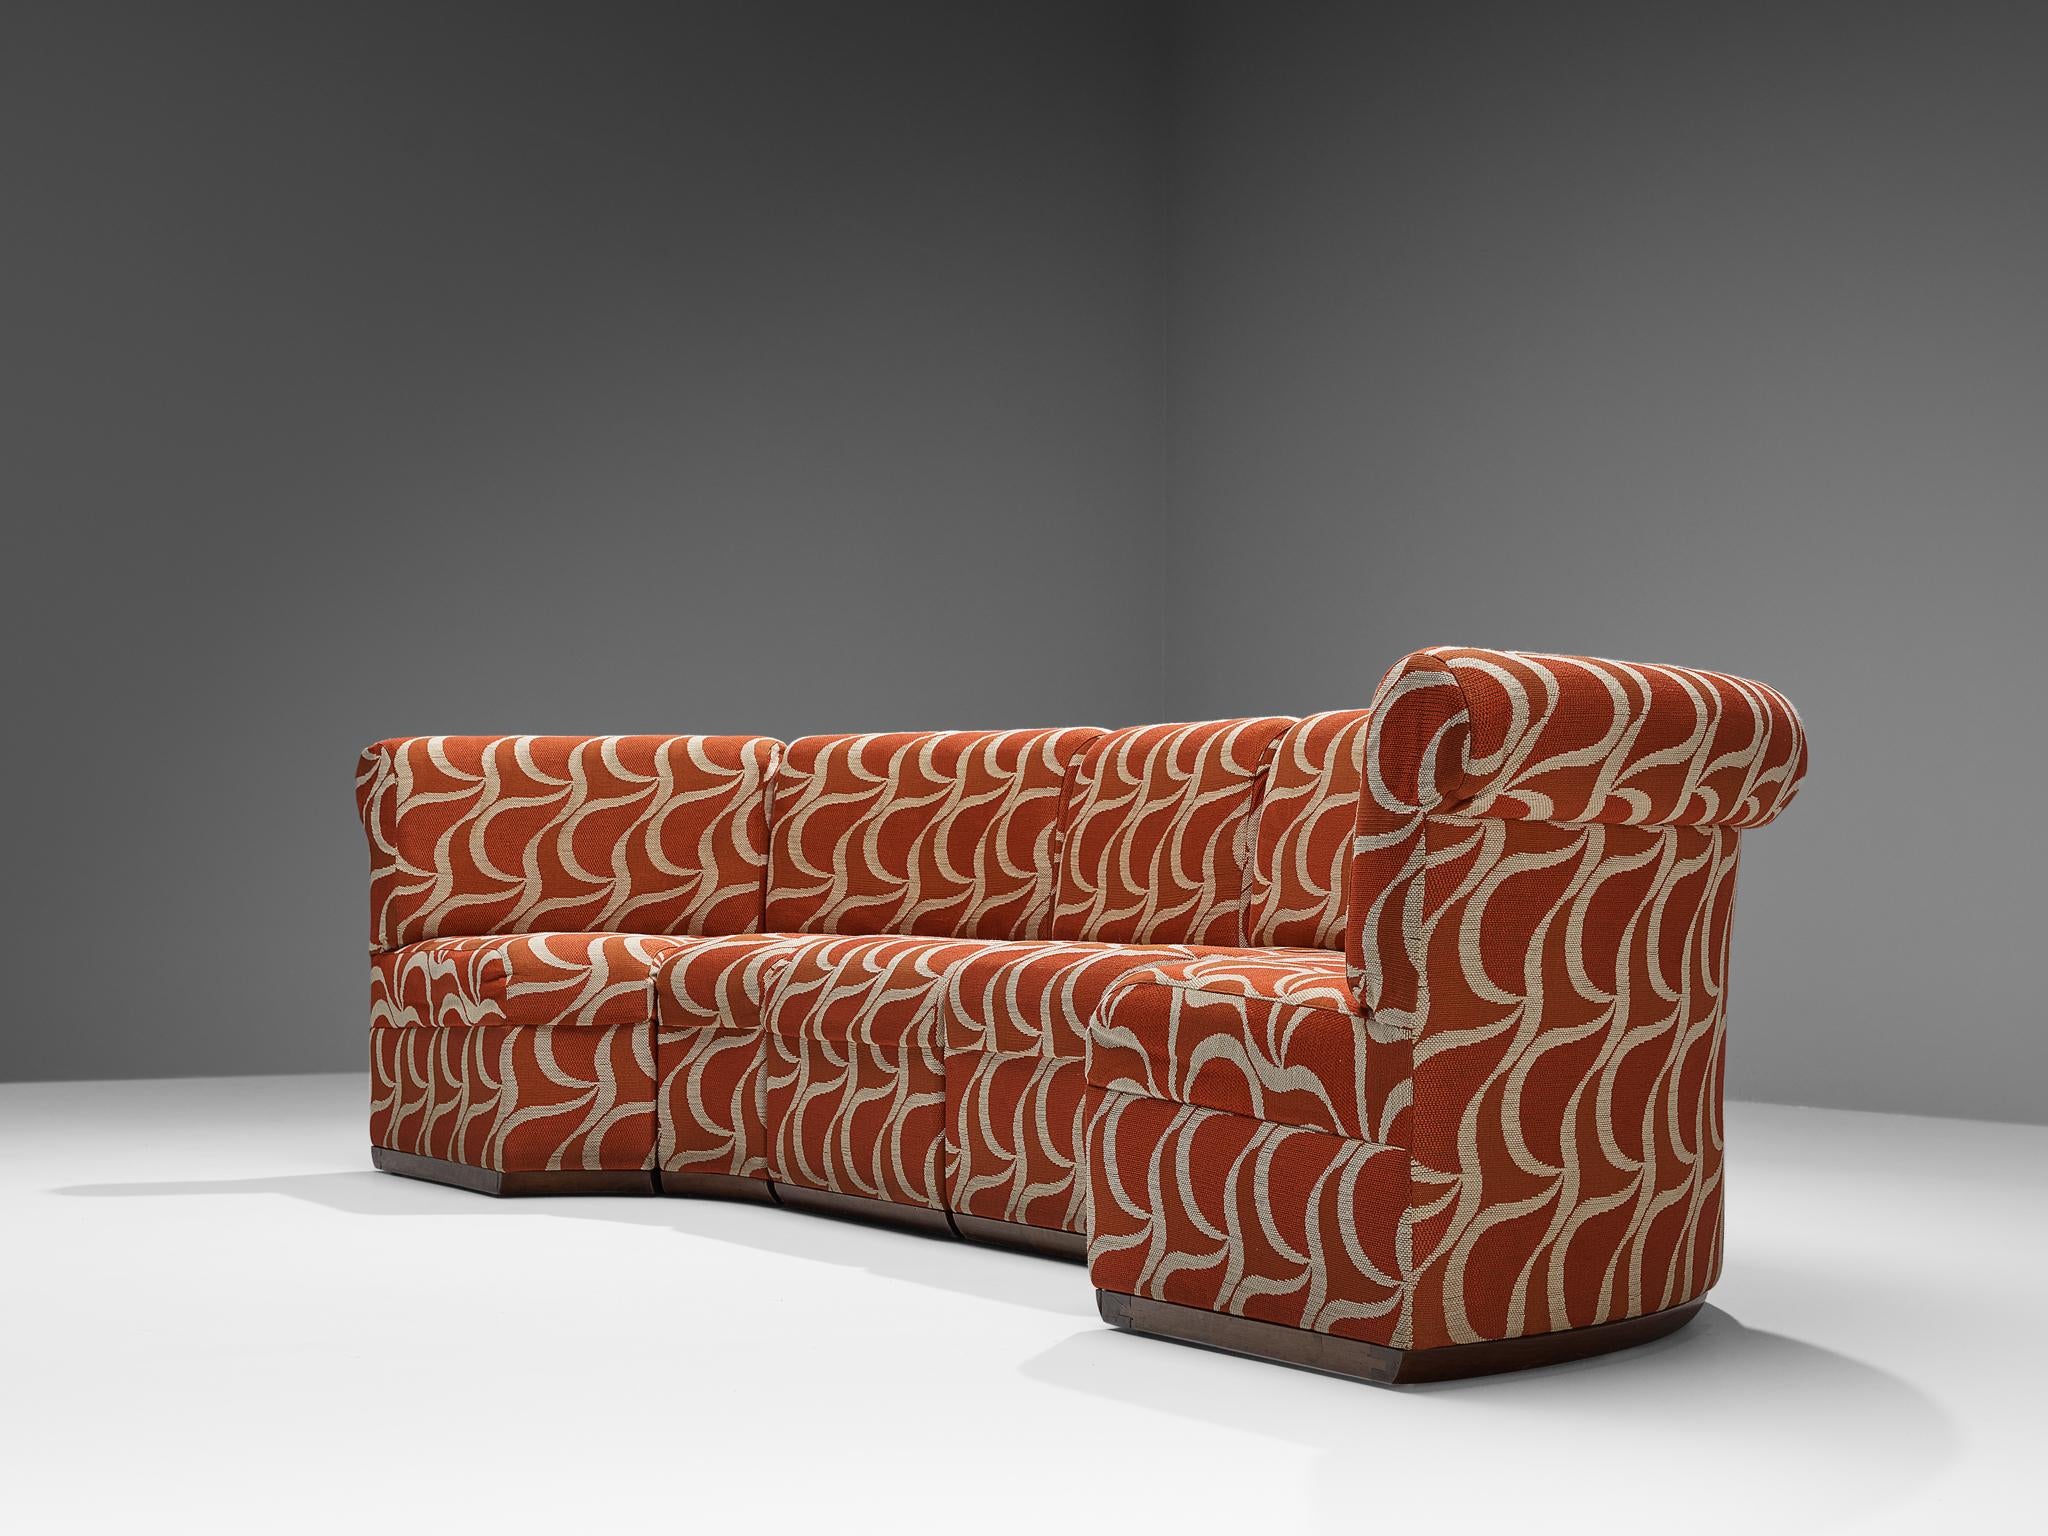 Italian Sectional Sofa in Red Orange Patterned Upholstery